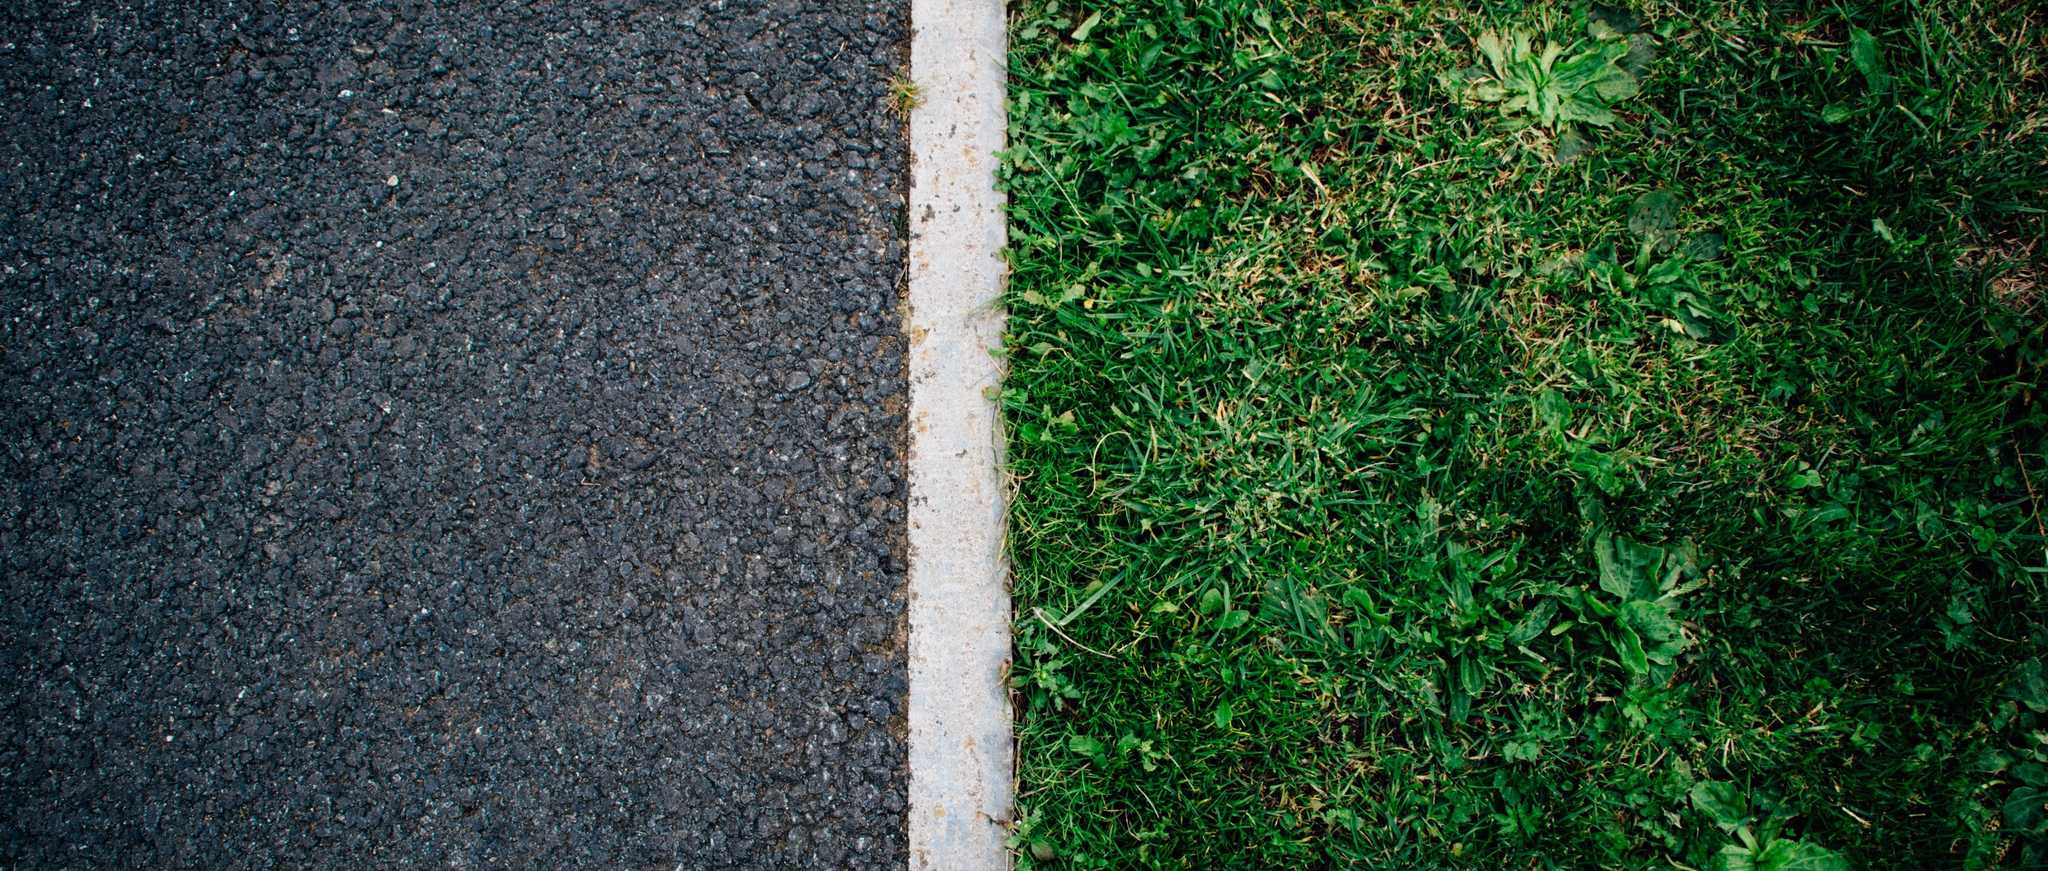 A lawn and a road clearly separated by a curb